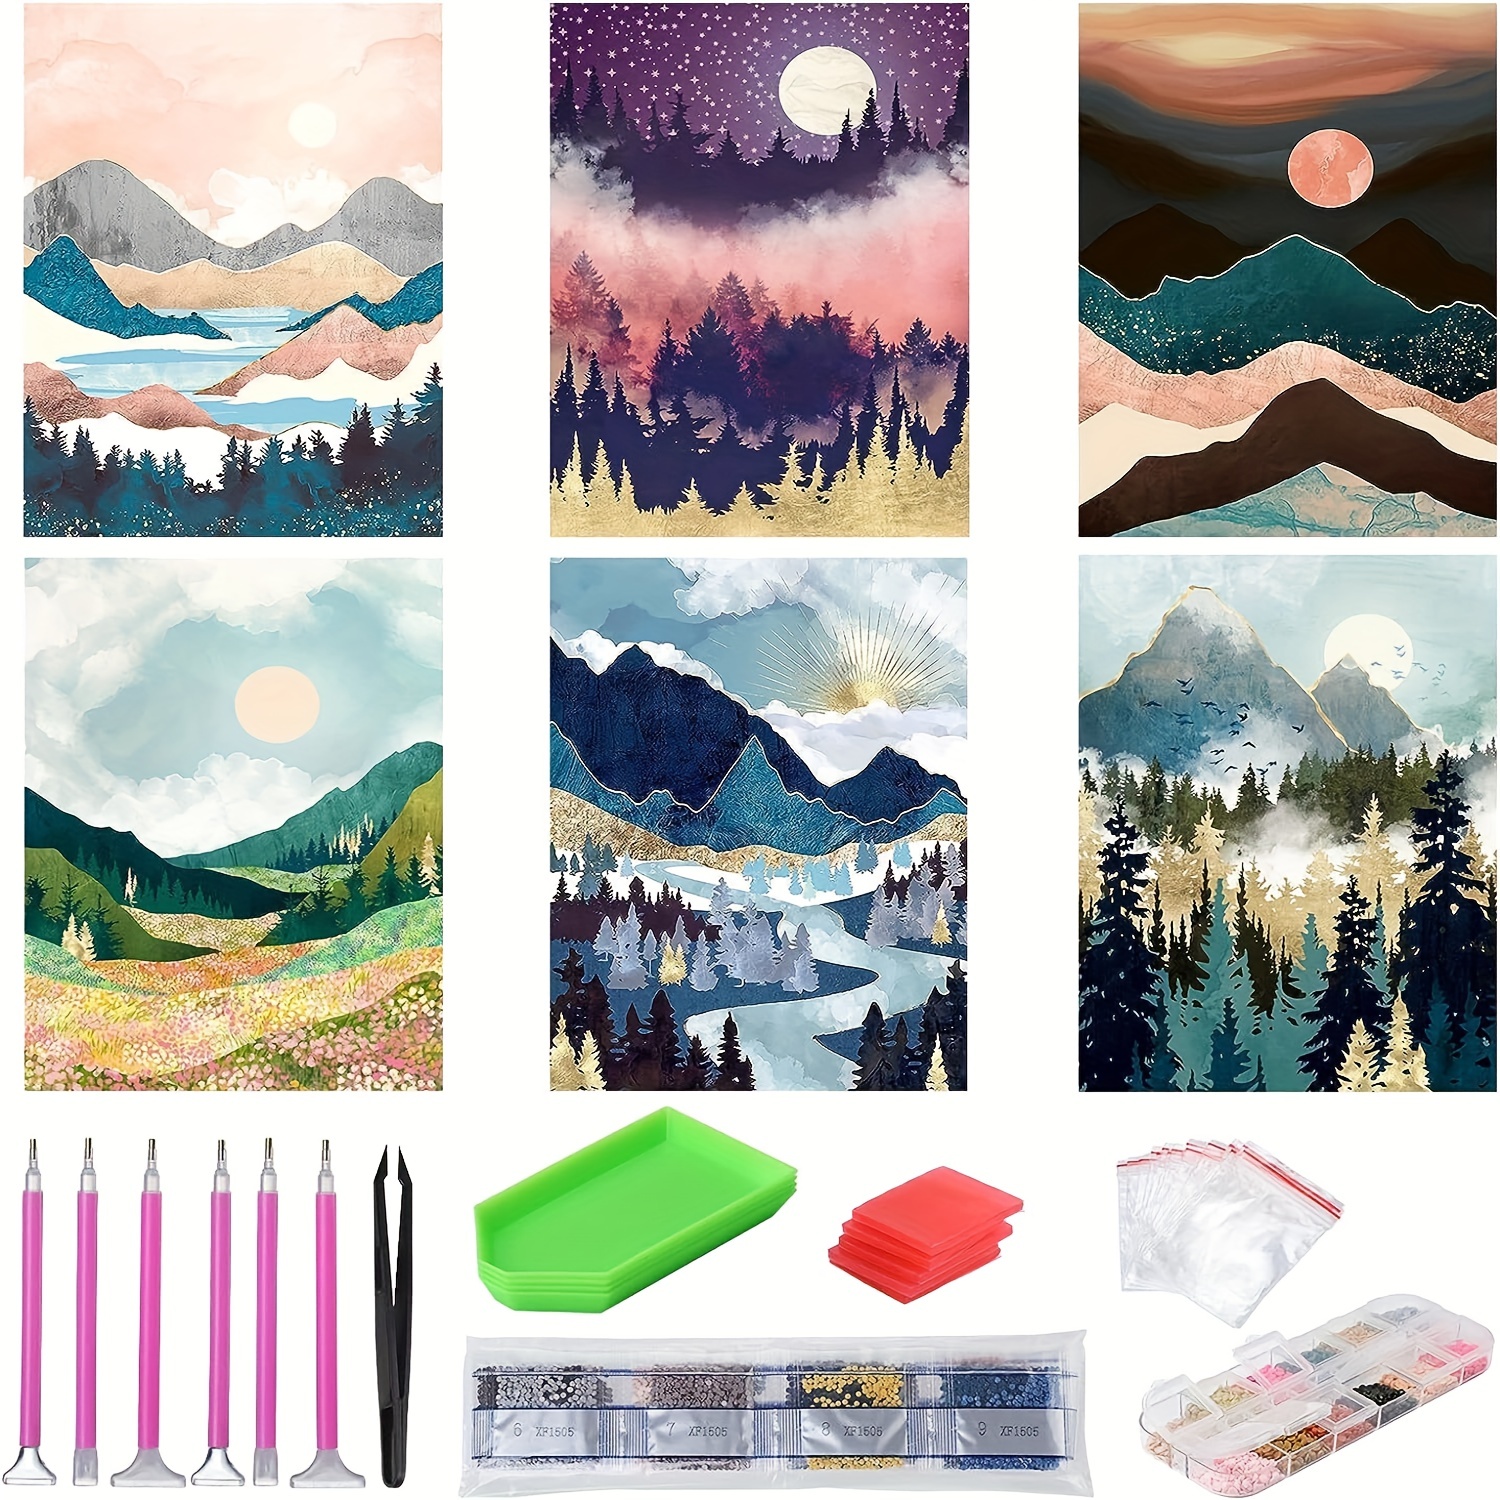 Nature's Retreat: 5D Diamond Art Camping Rules Kit - DIY Paint by Number  for Adults - Full Round Drill - Home Recreation & Wall Decoration - 12x16  inch